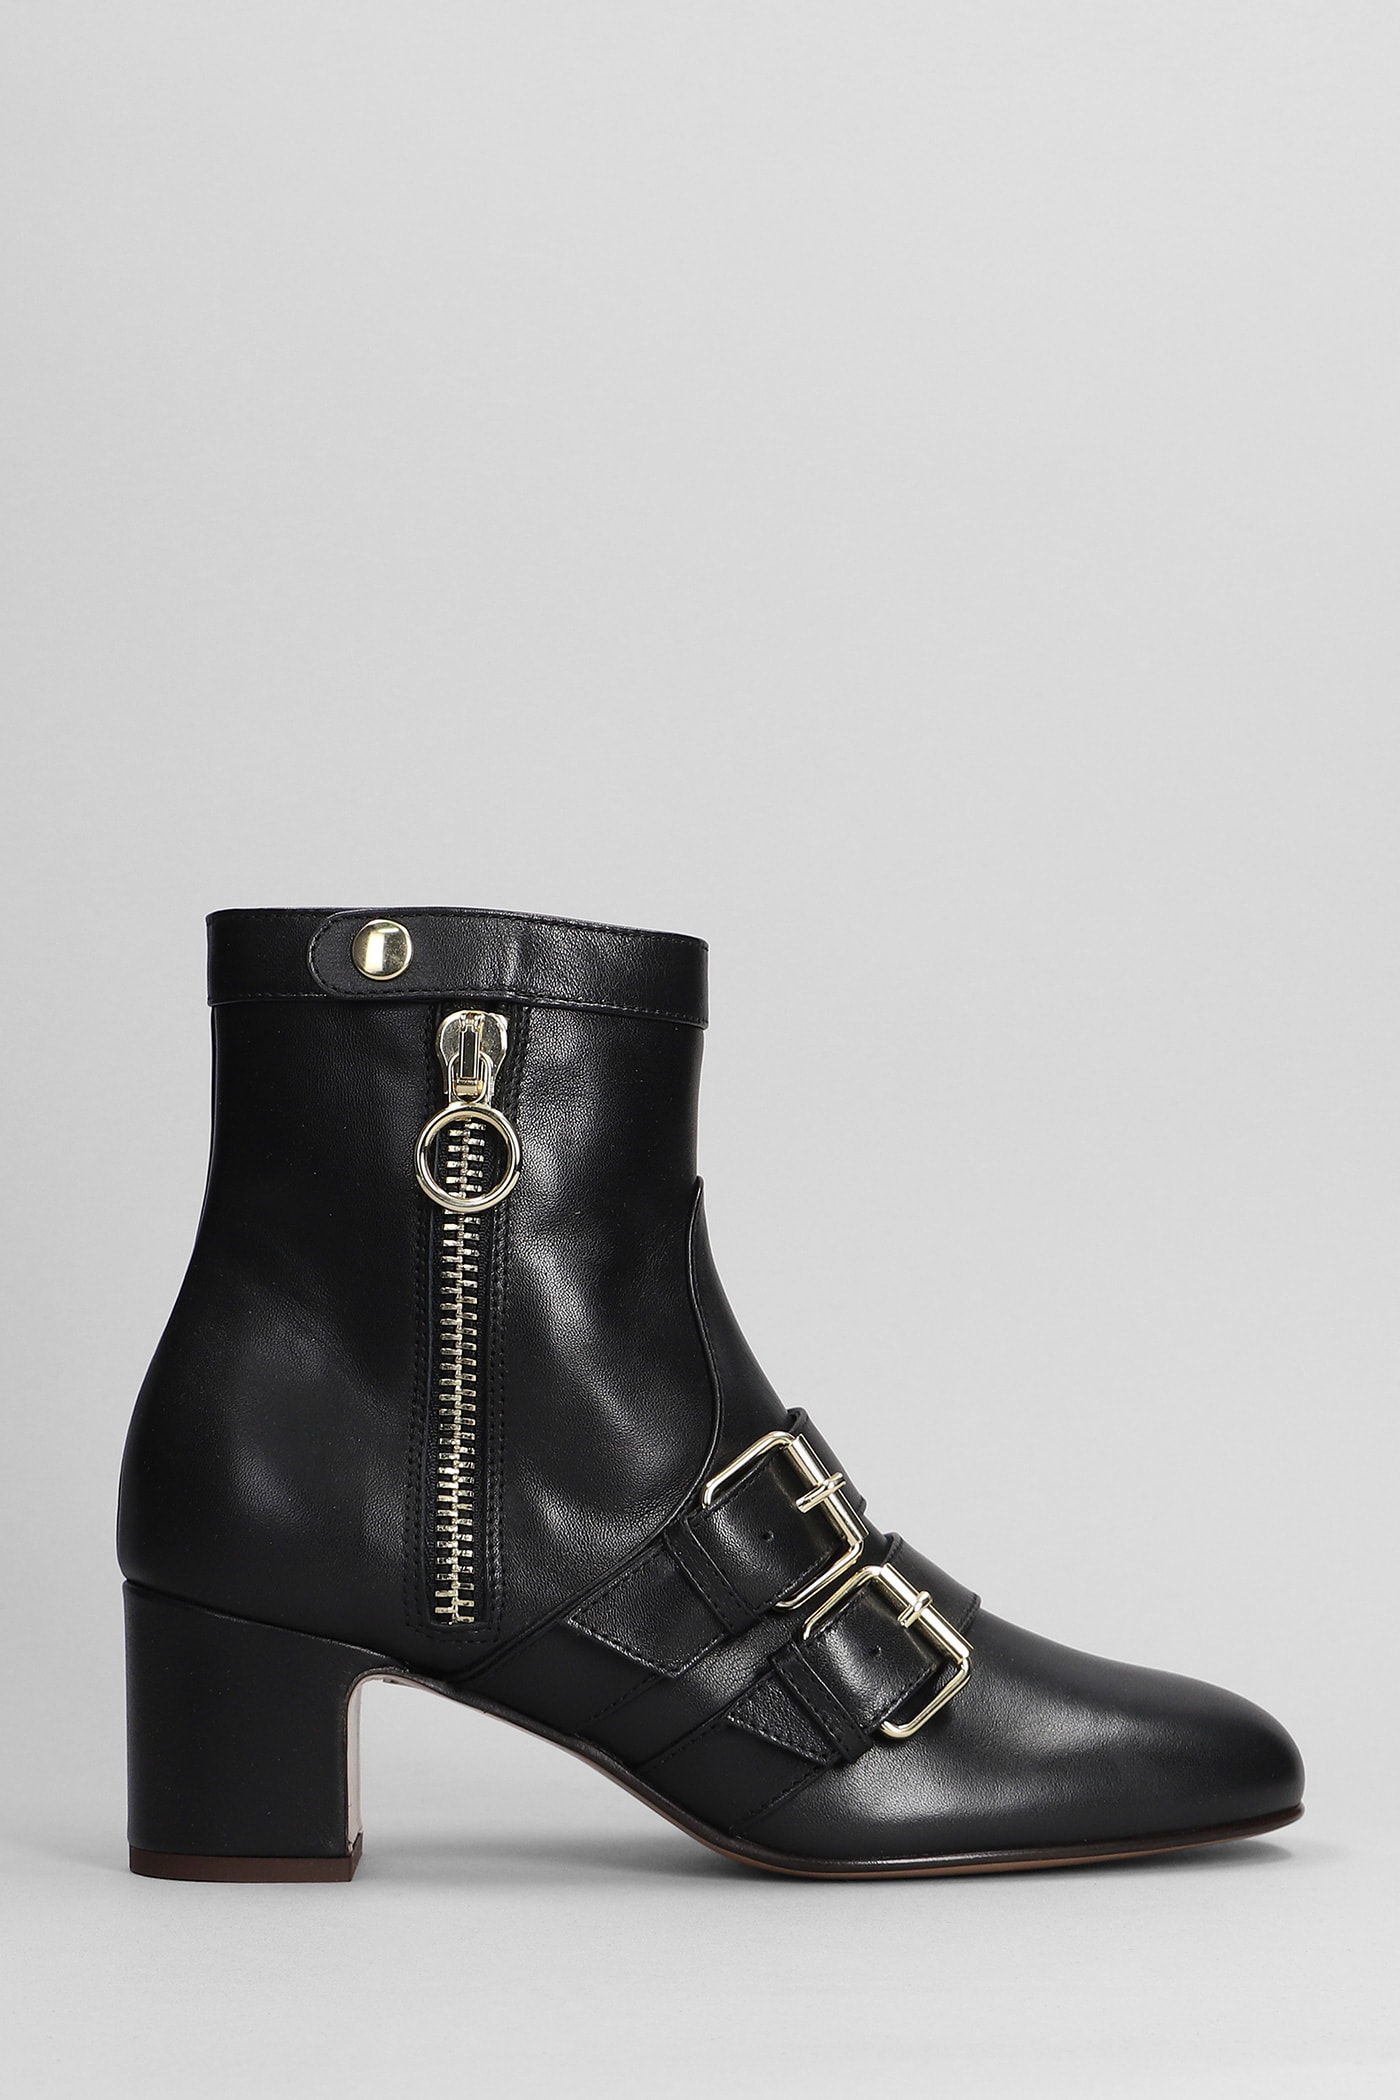 RELAC HIGH HEELS ANKLE BOOTS IN BLACK LEATHER